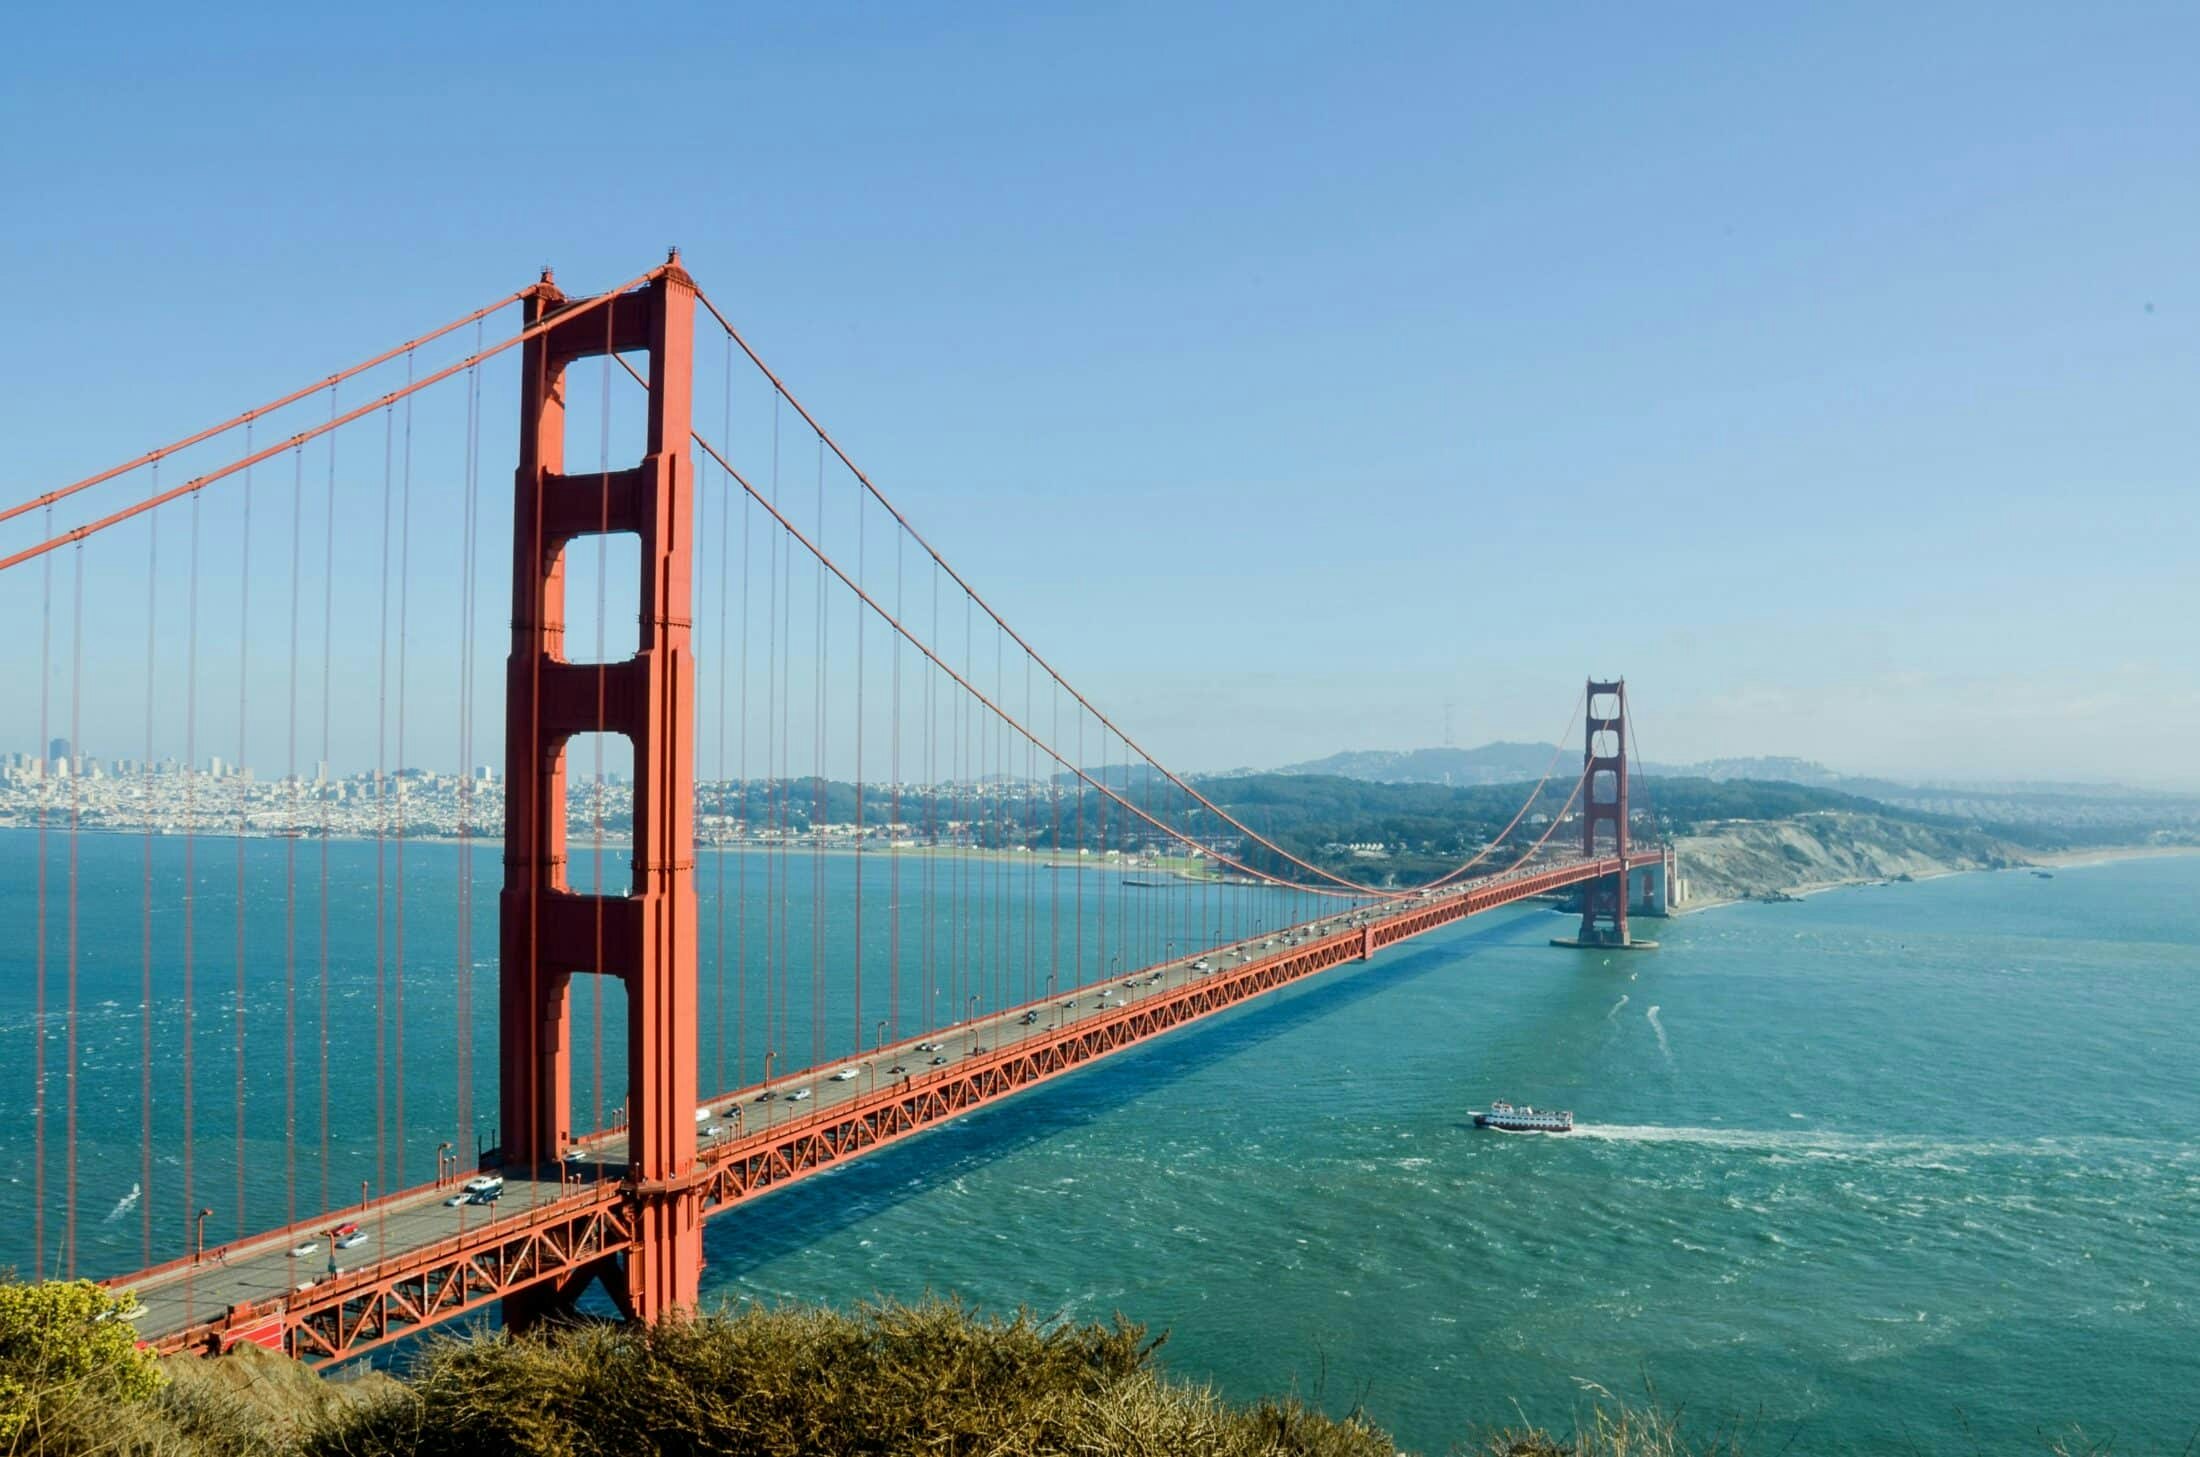 Golden Gate Bridge - one of the top things to see in San Francisco